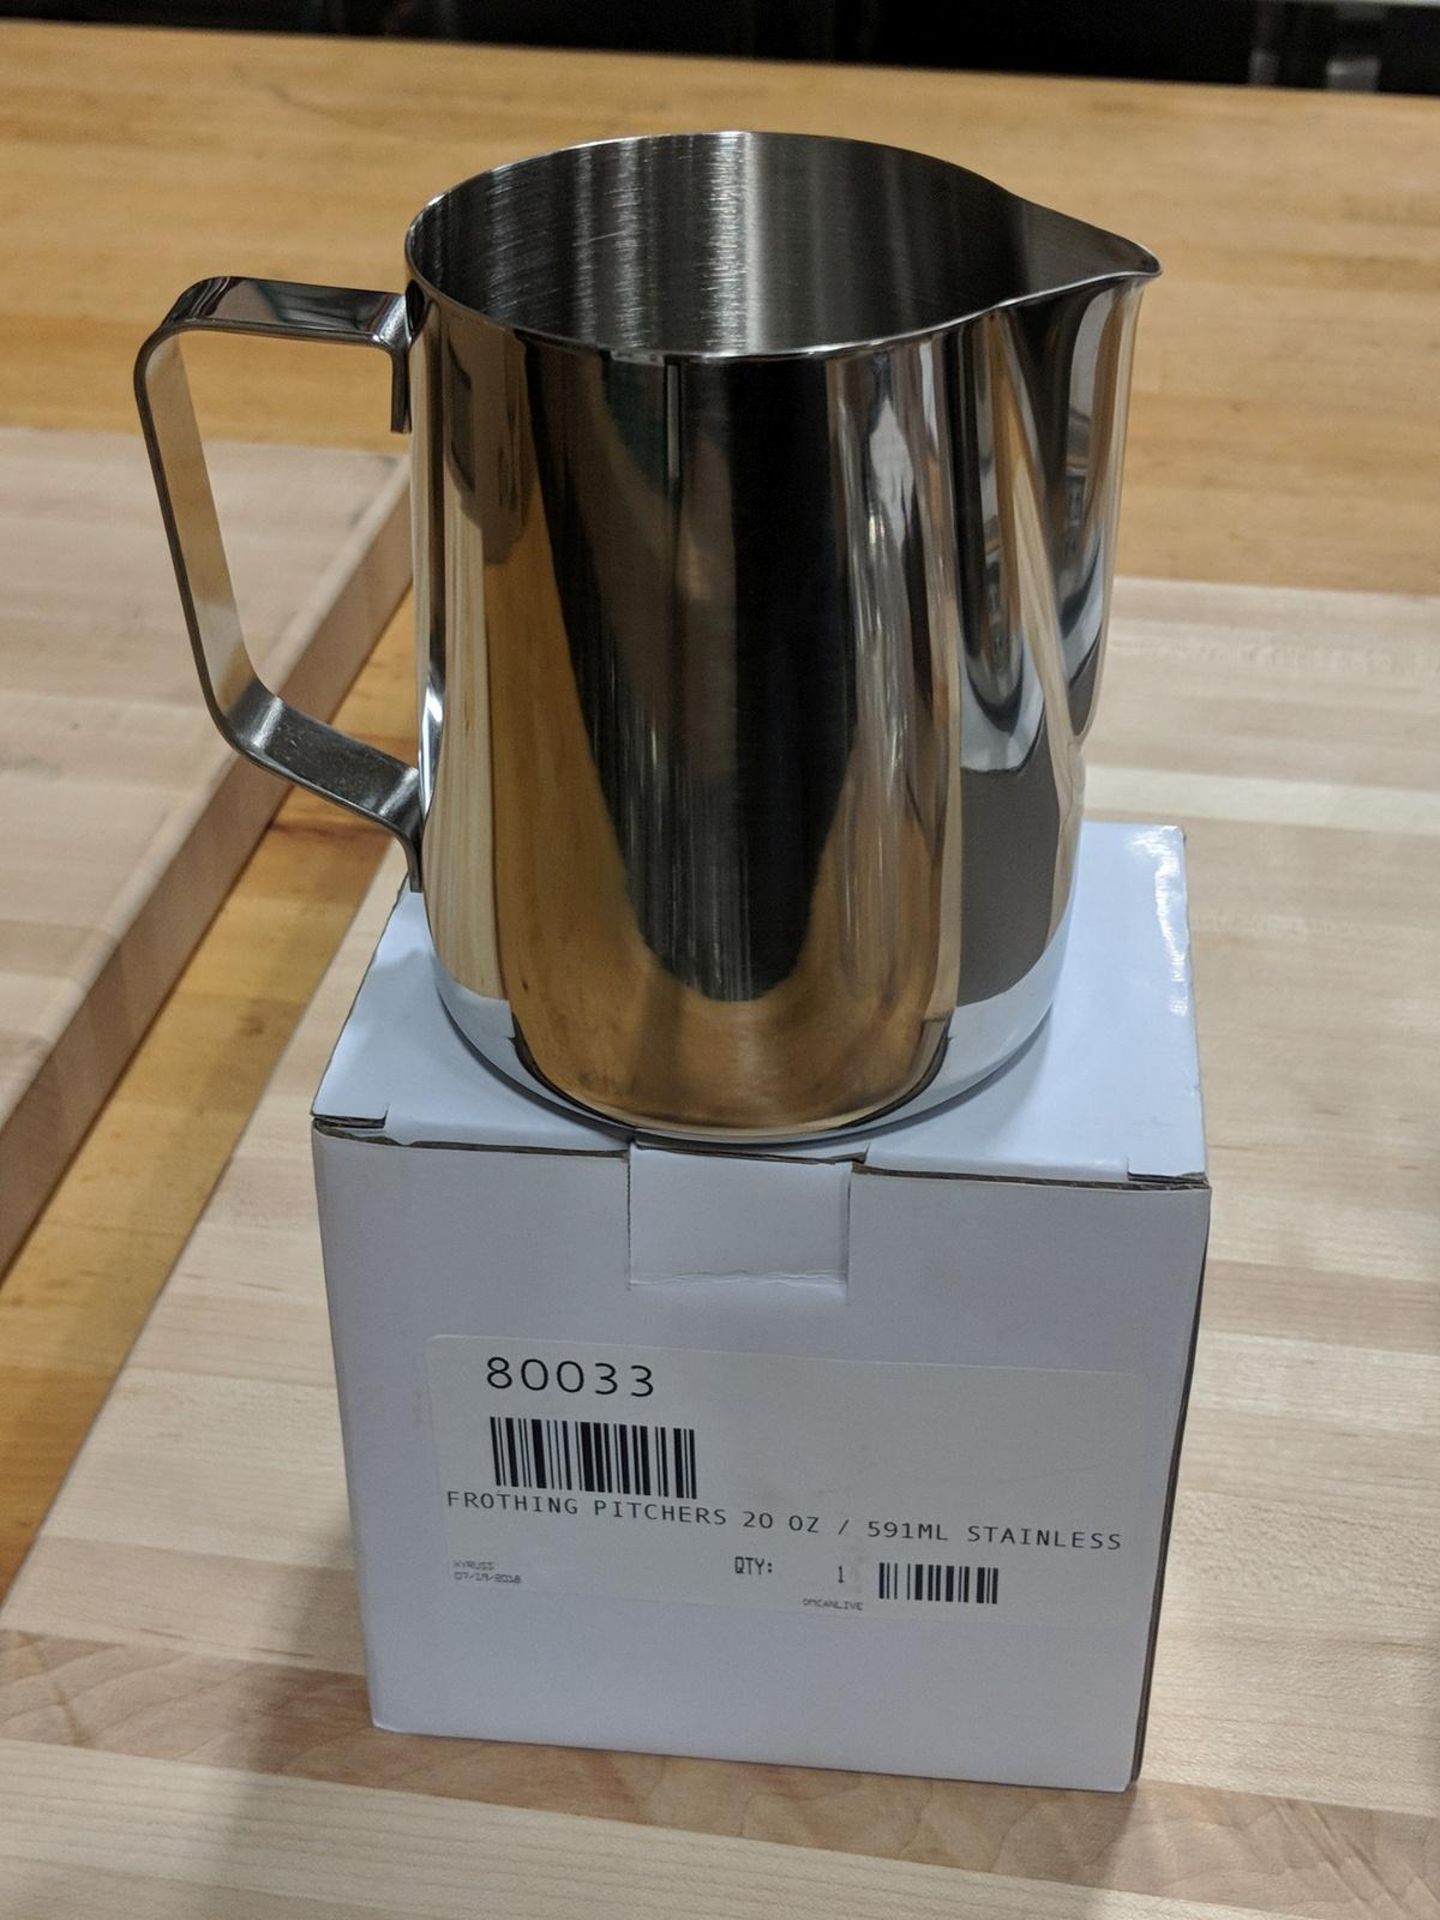 20oz/591ml Stainless Steel Frothing Pitchers - Lot of 2